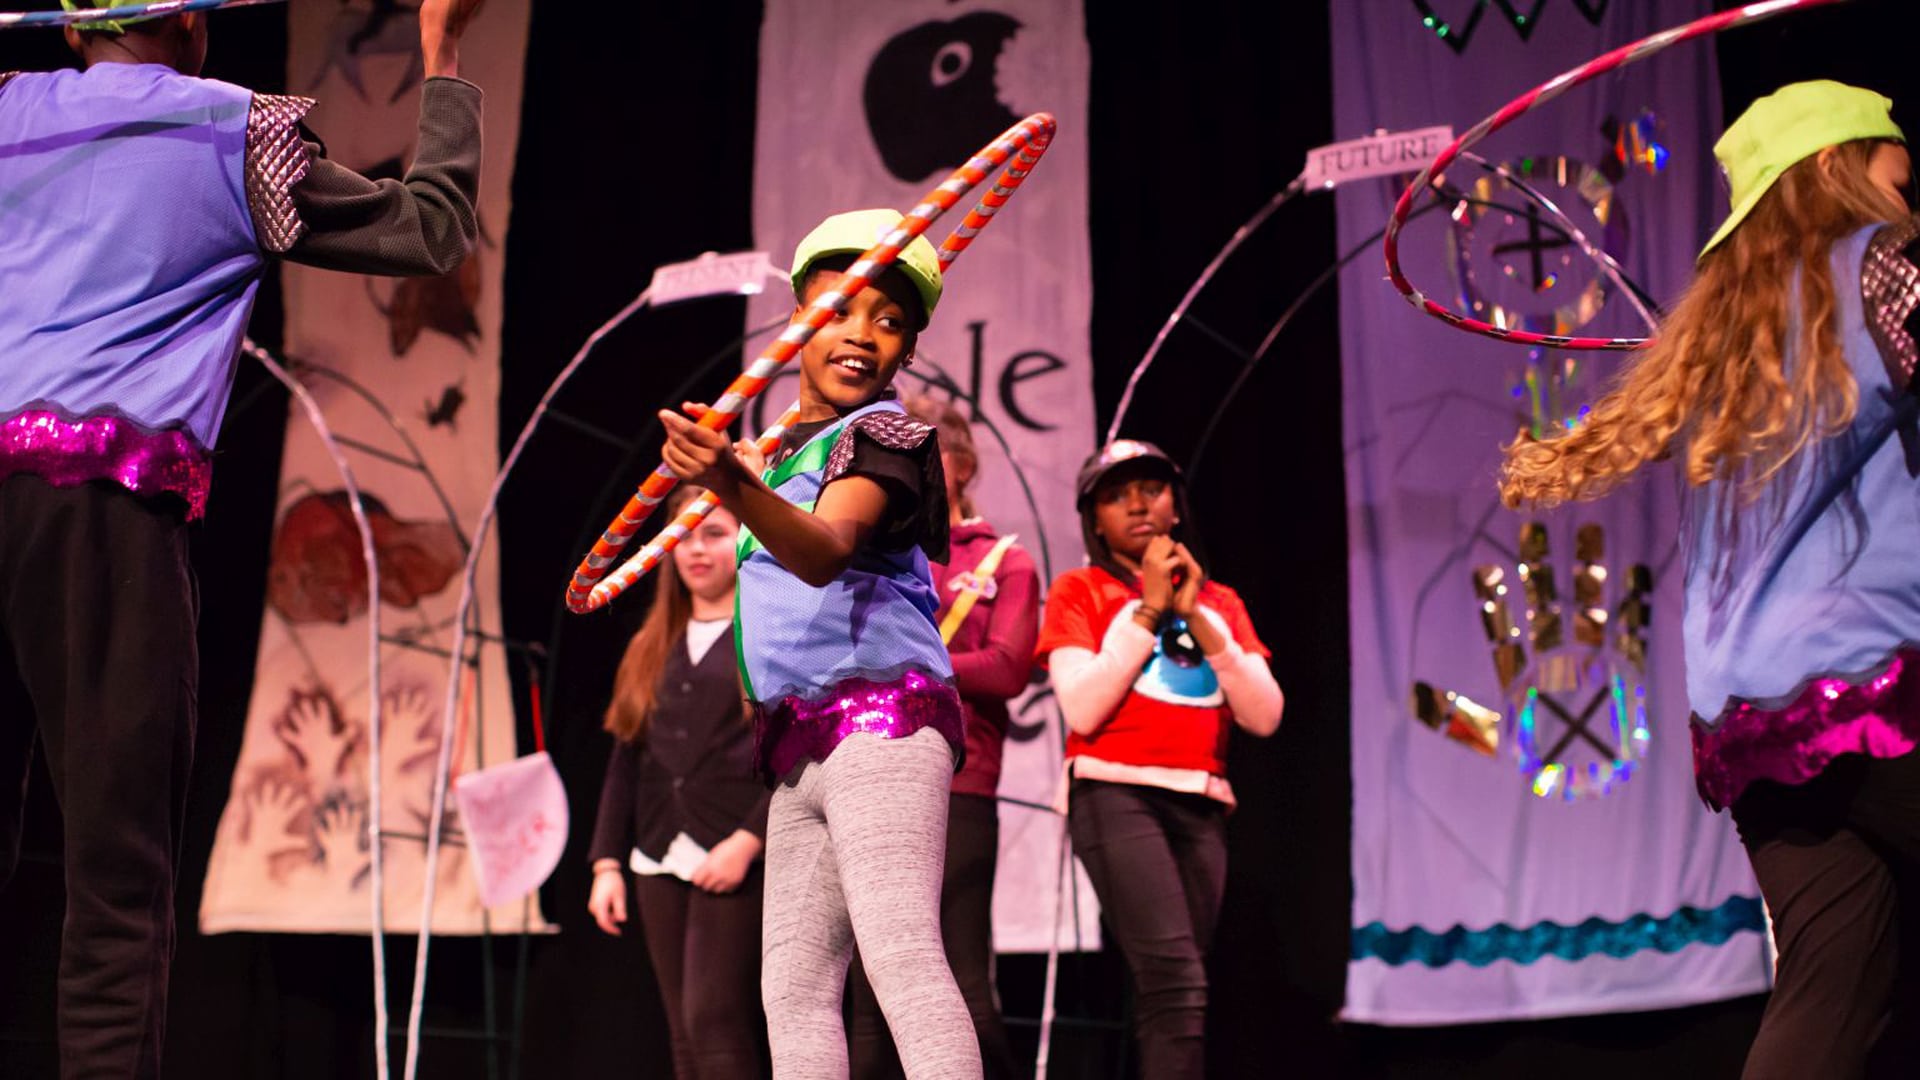 Young performers on stage, one in the centre with a hula hoop